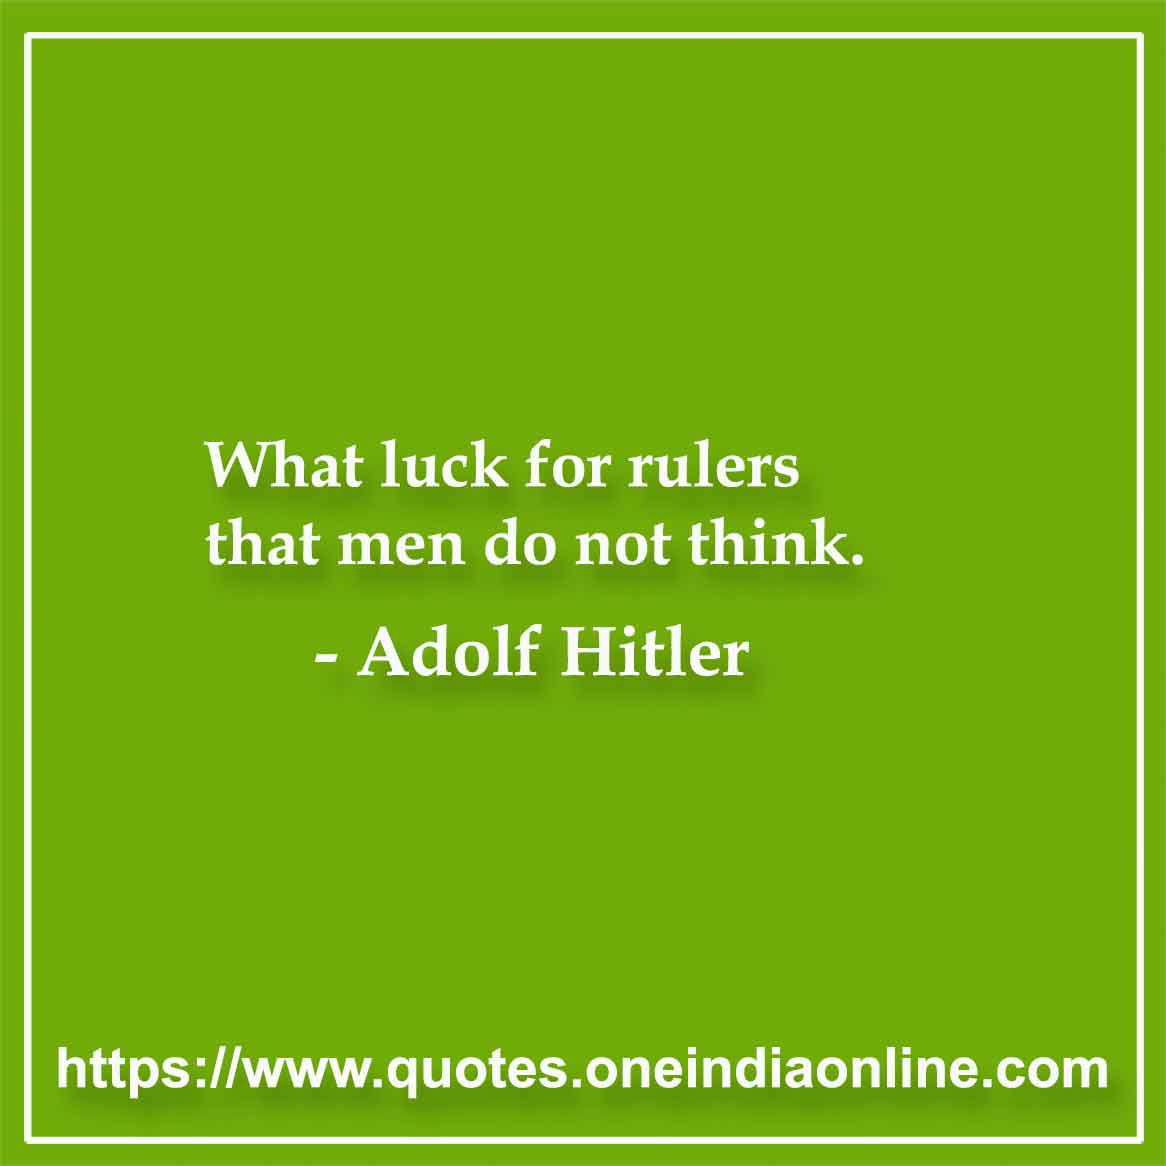 What luck for rulers that men do not think.

- Leadership Quotes by Adolf Hitler